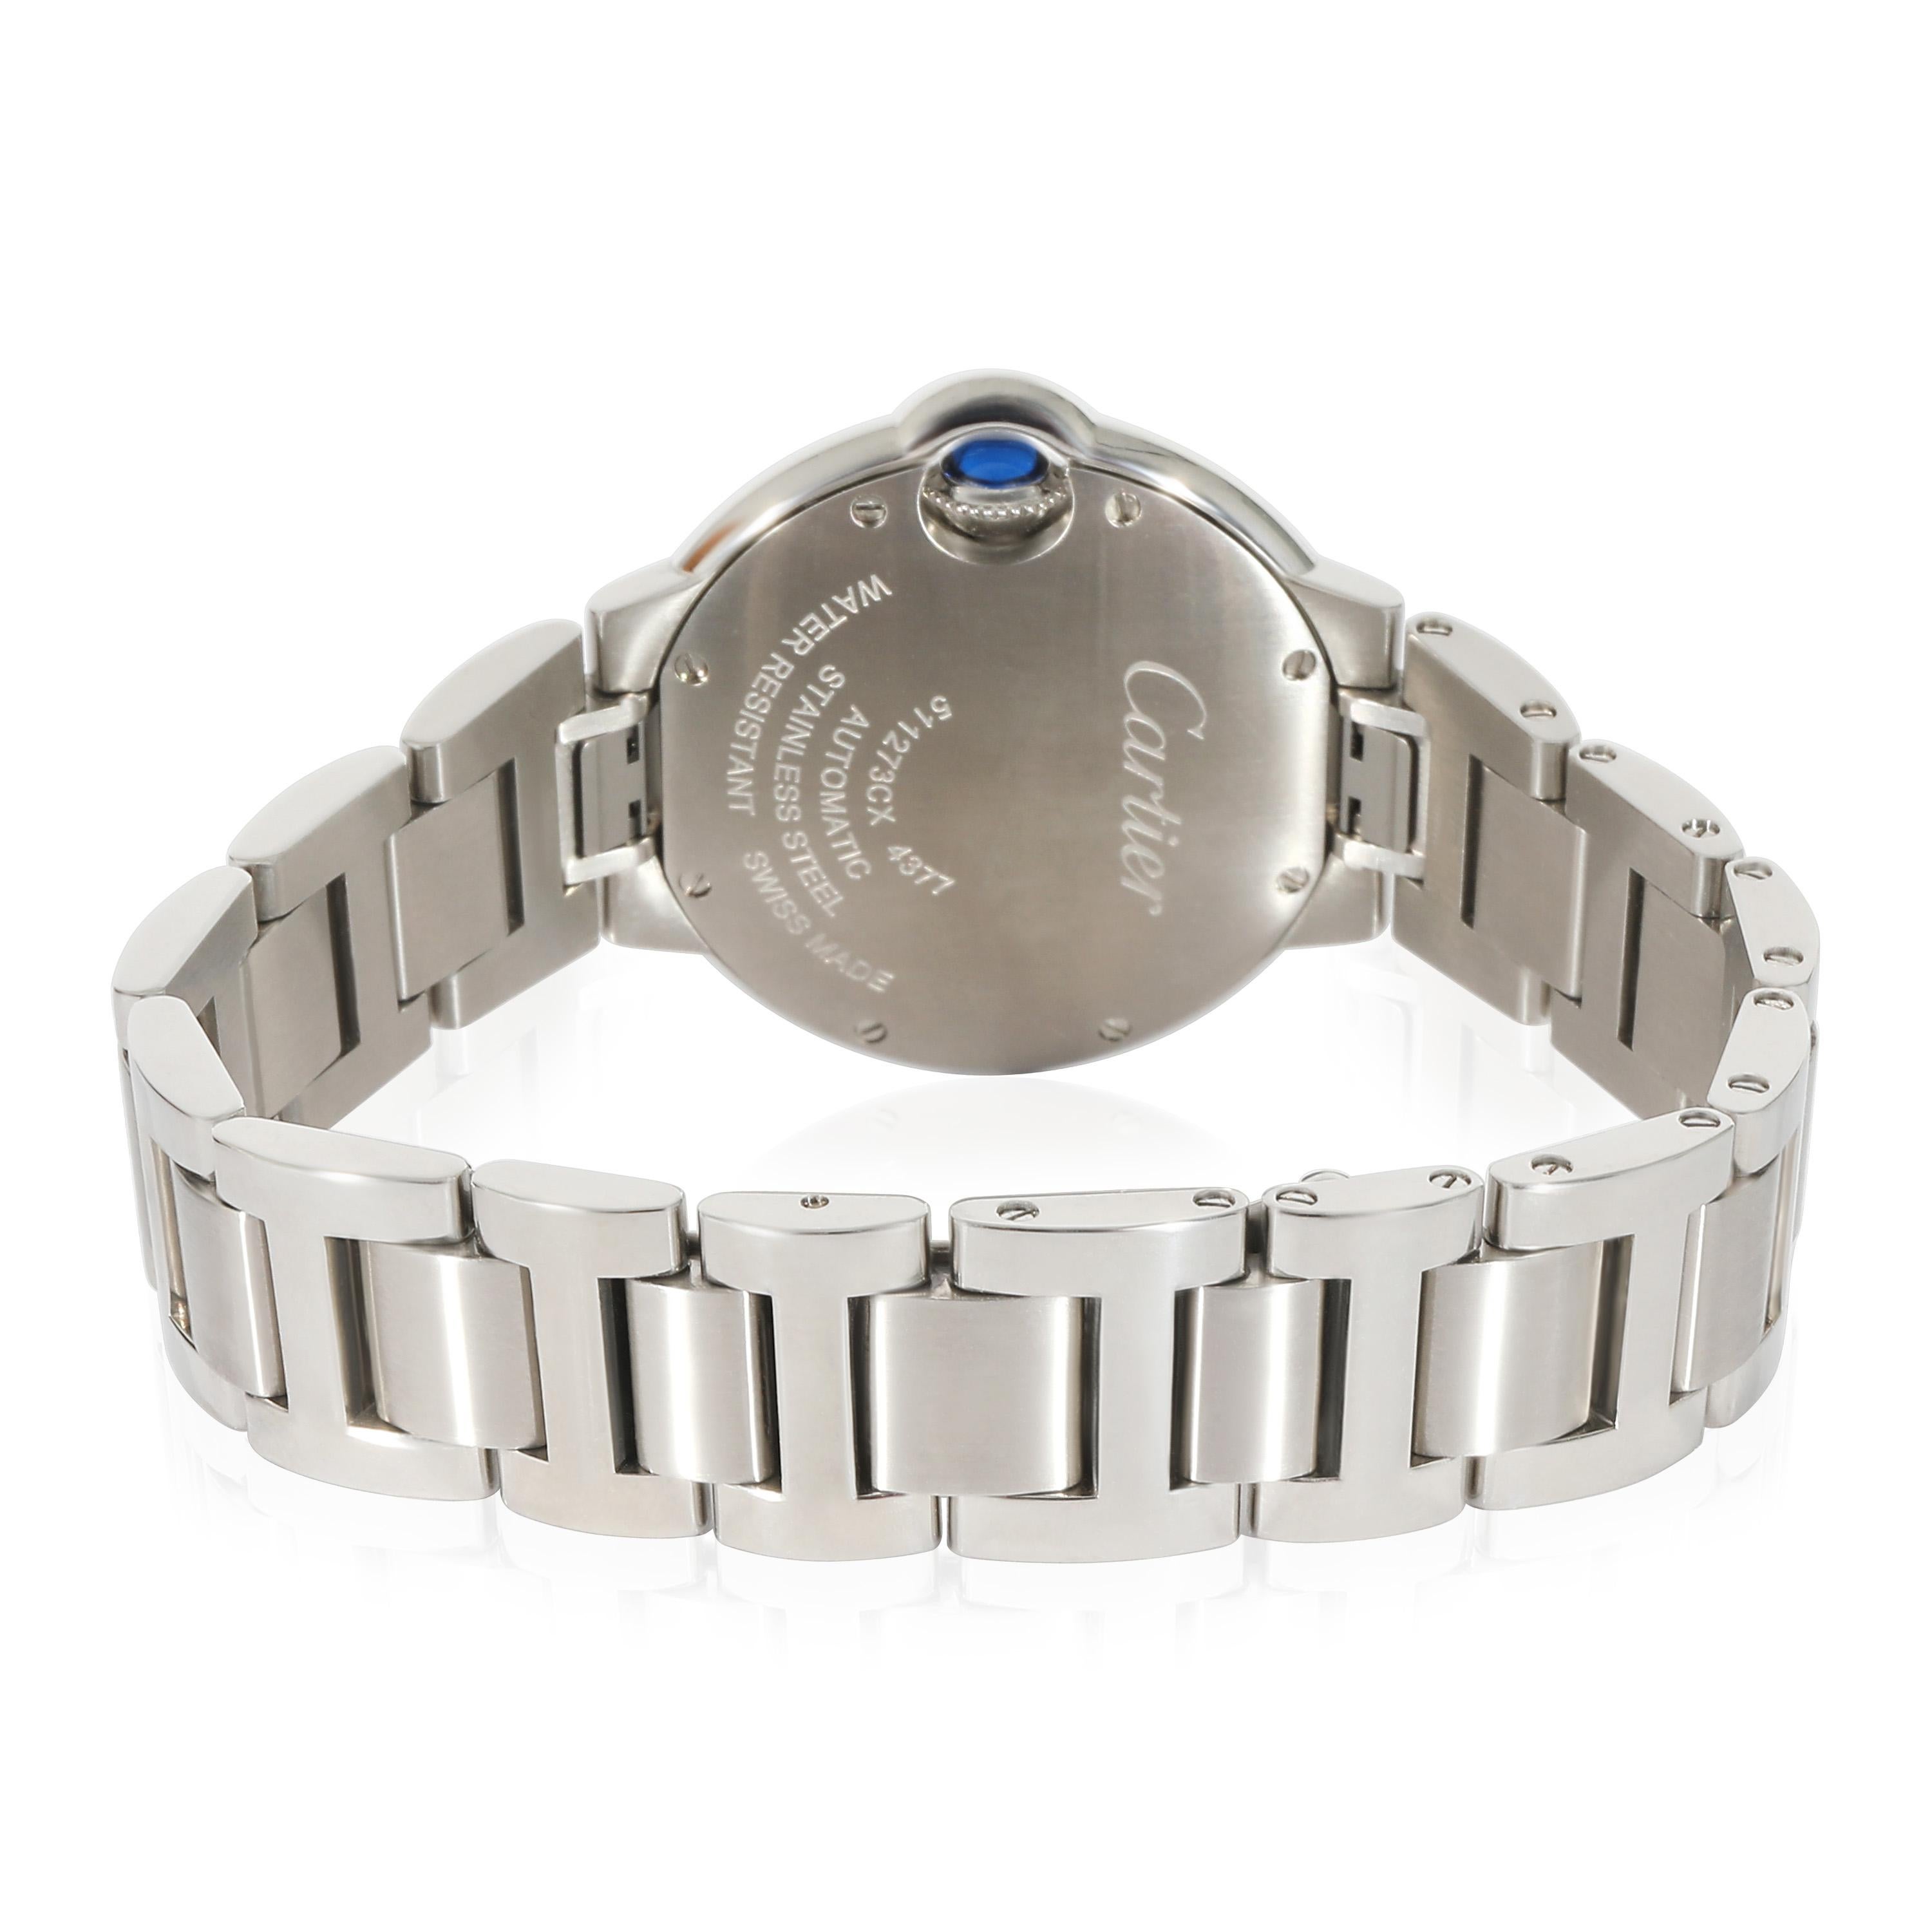 
Cartier Ballon Bleu de Cartier W4BB0023 Women's Watch in Stainless Steel

SKU: 133715

PRIMARY DETAILS
Brand:  Cartier
Model: Ballon Bleu de Cartier
Country of Origin: Switzerland
Movement Type: Mechanical: Automatic/Kinetic
Year of Manufacture: